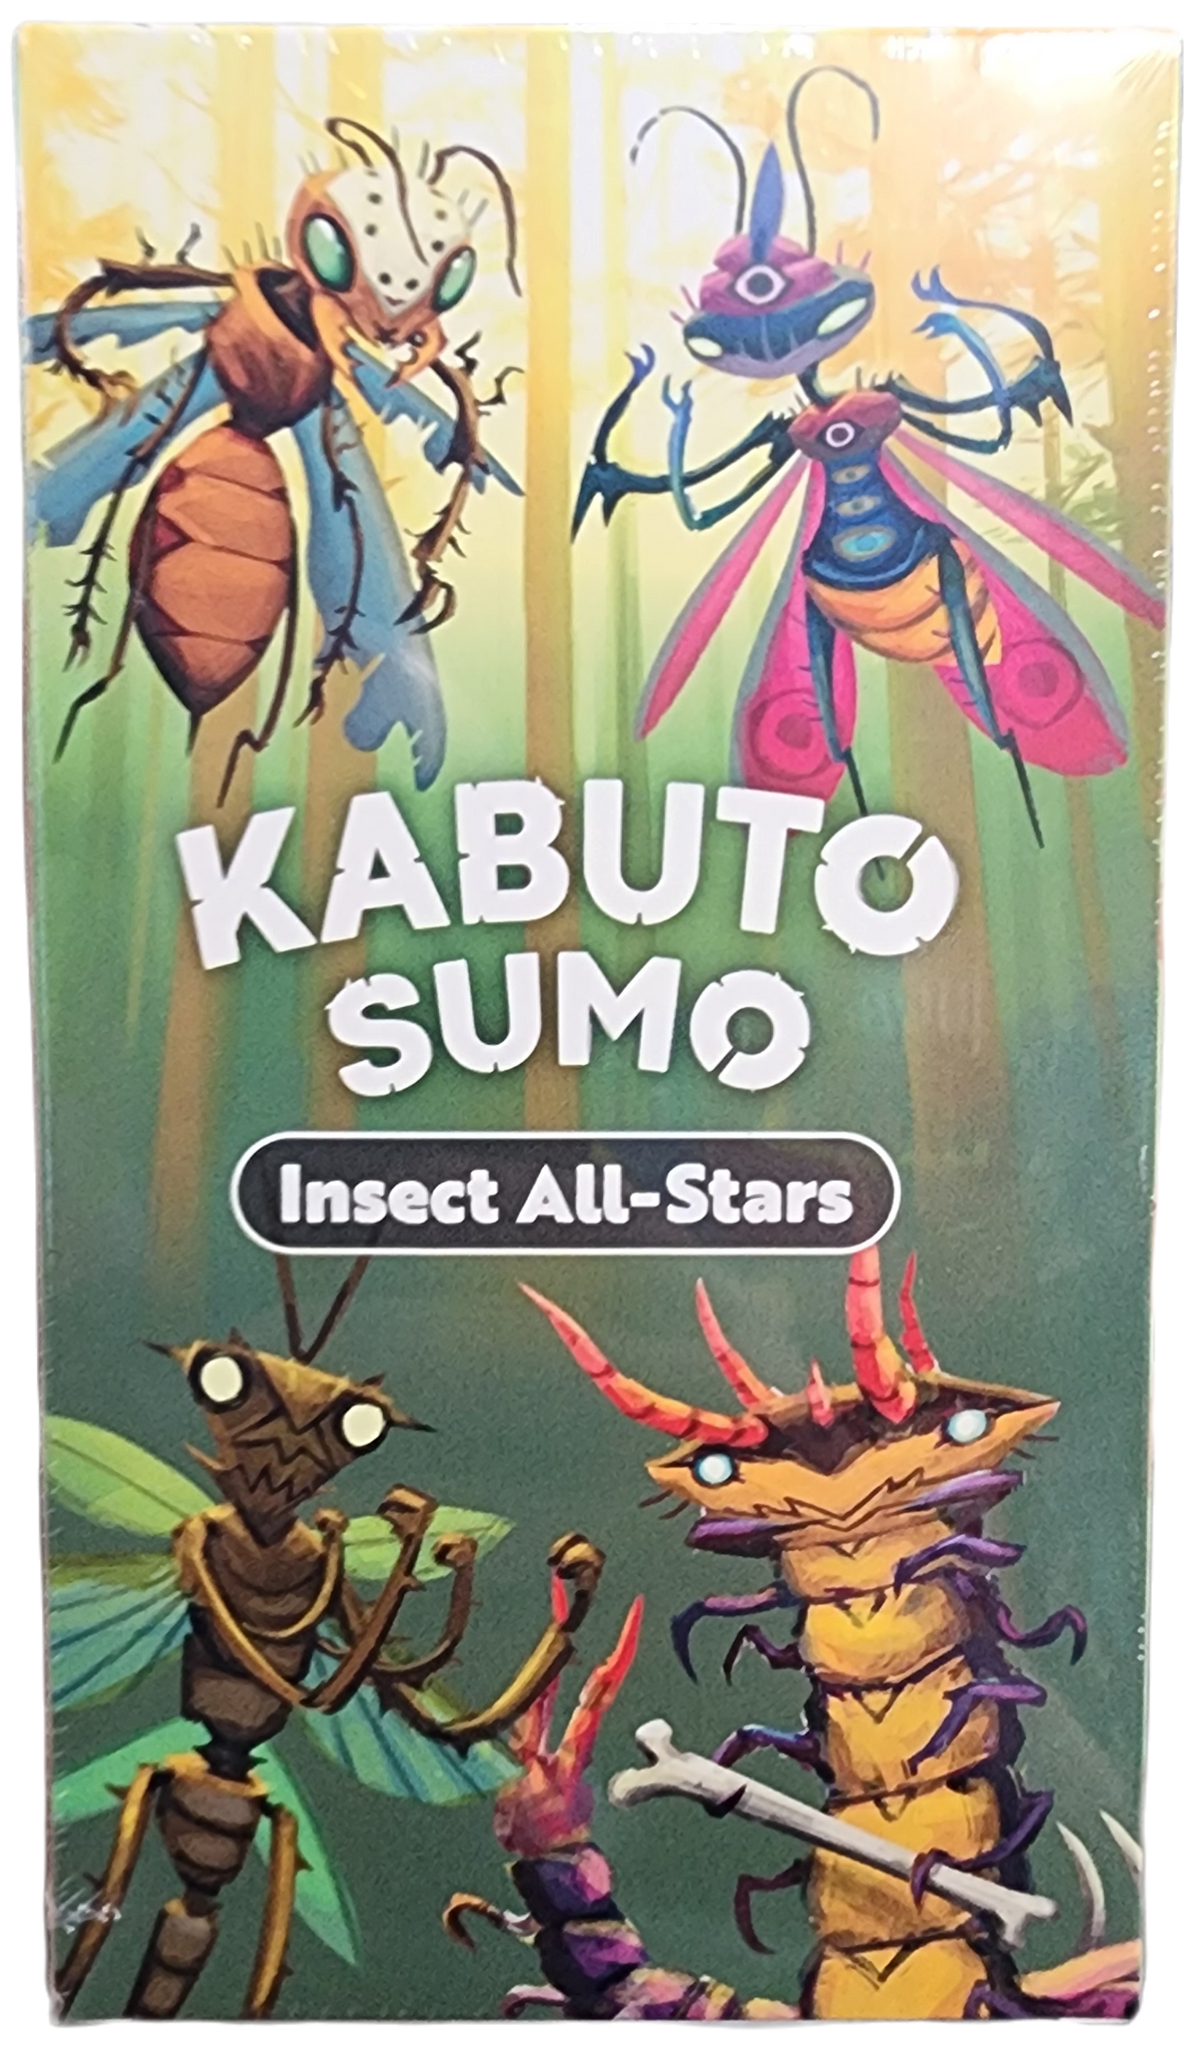 Kabuto Sumo: Insect All-Stars!